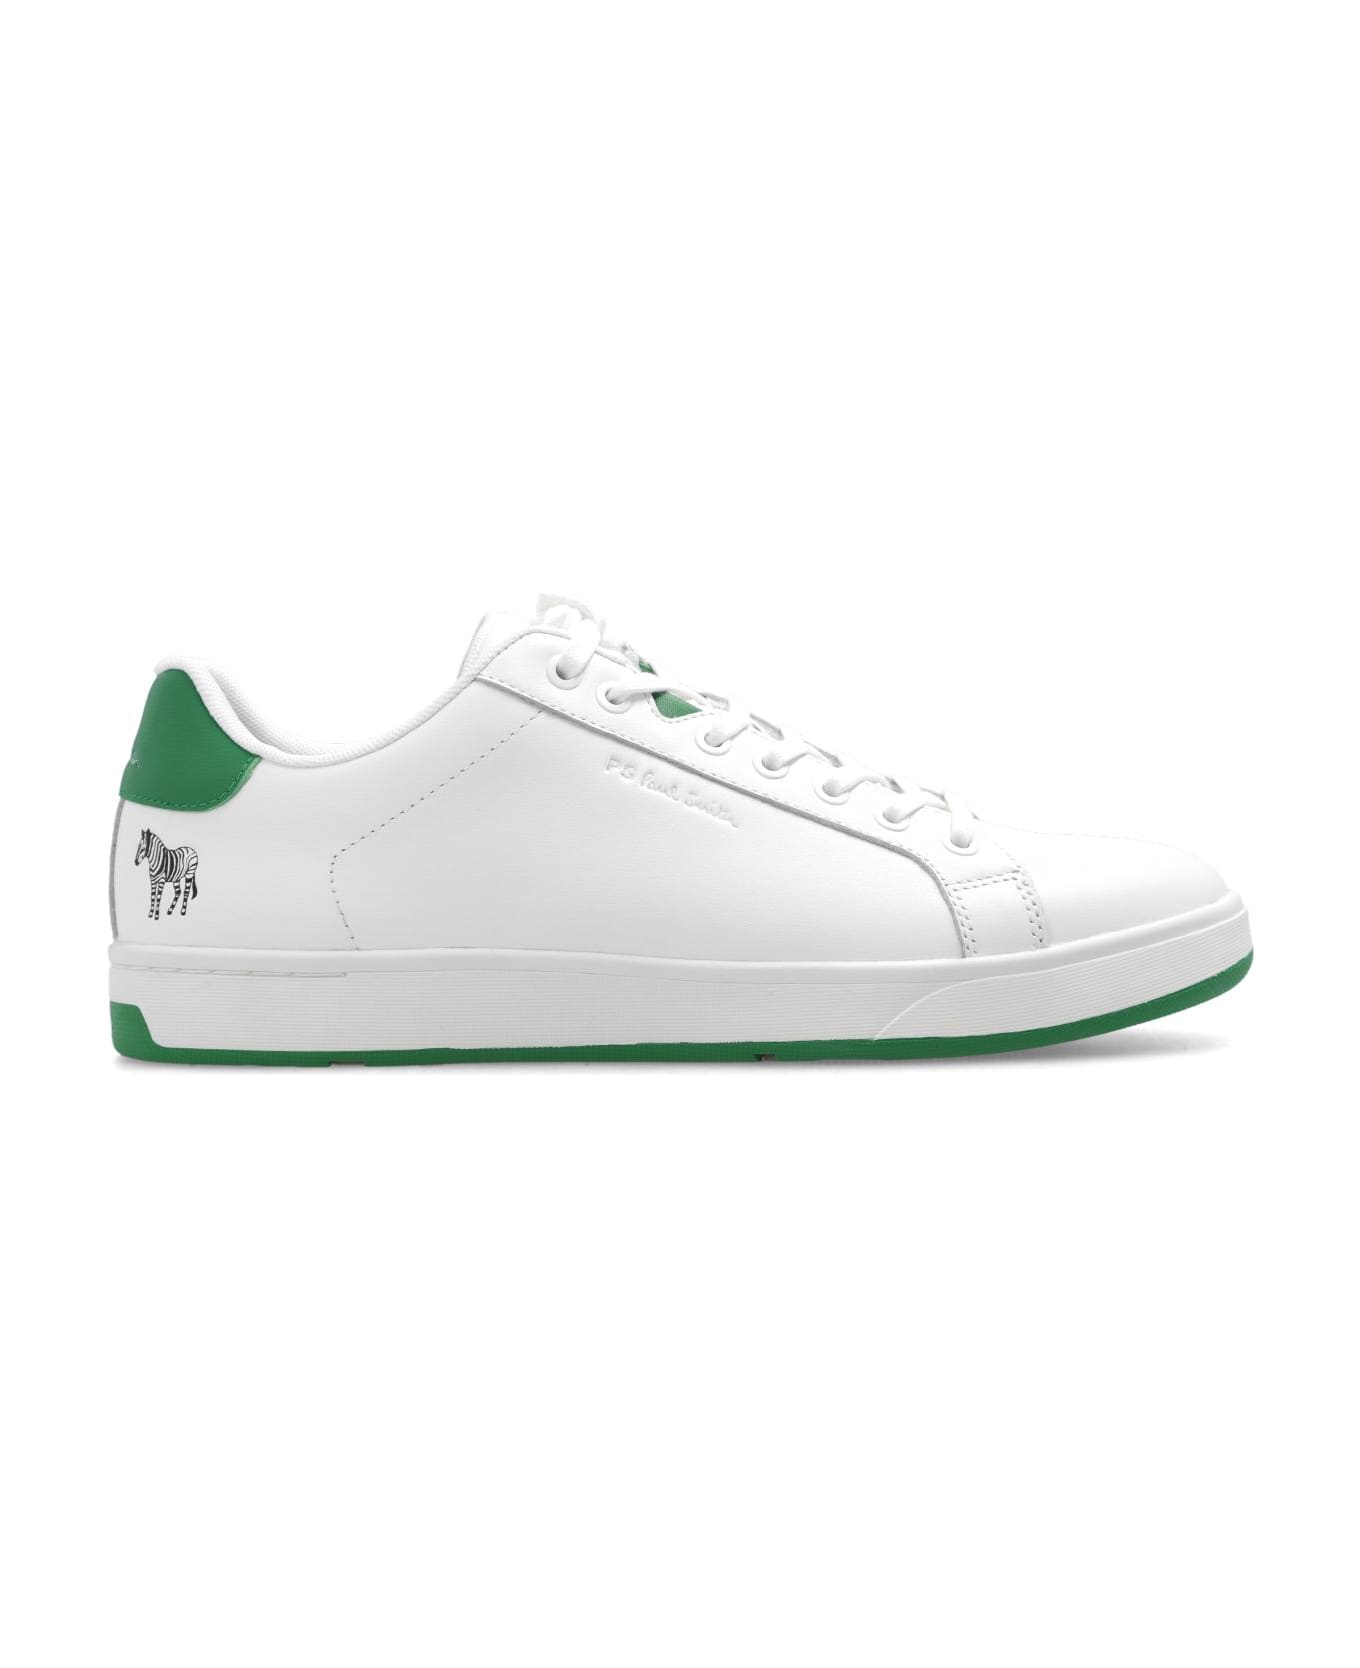 Paul Smith Ps Paul Smith 'albany' Sneakers - White スニーカー